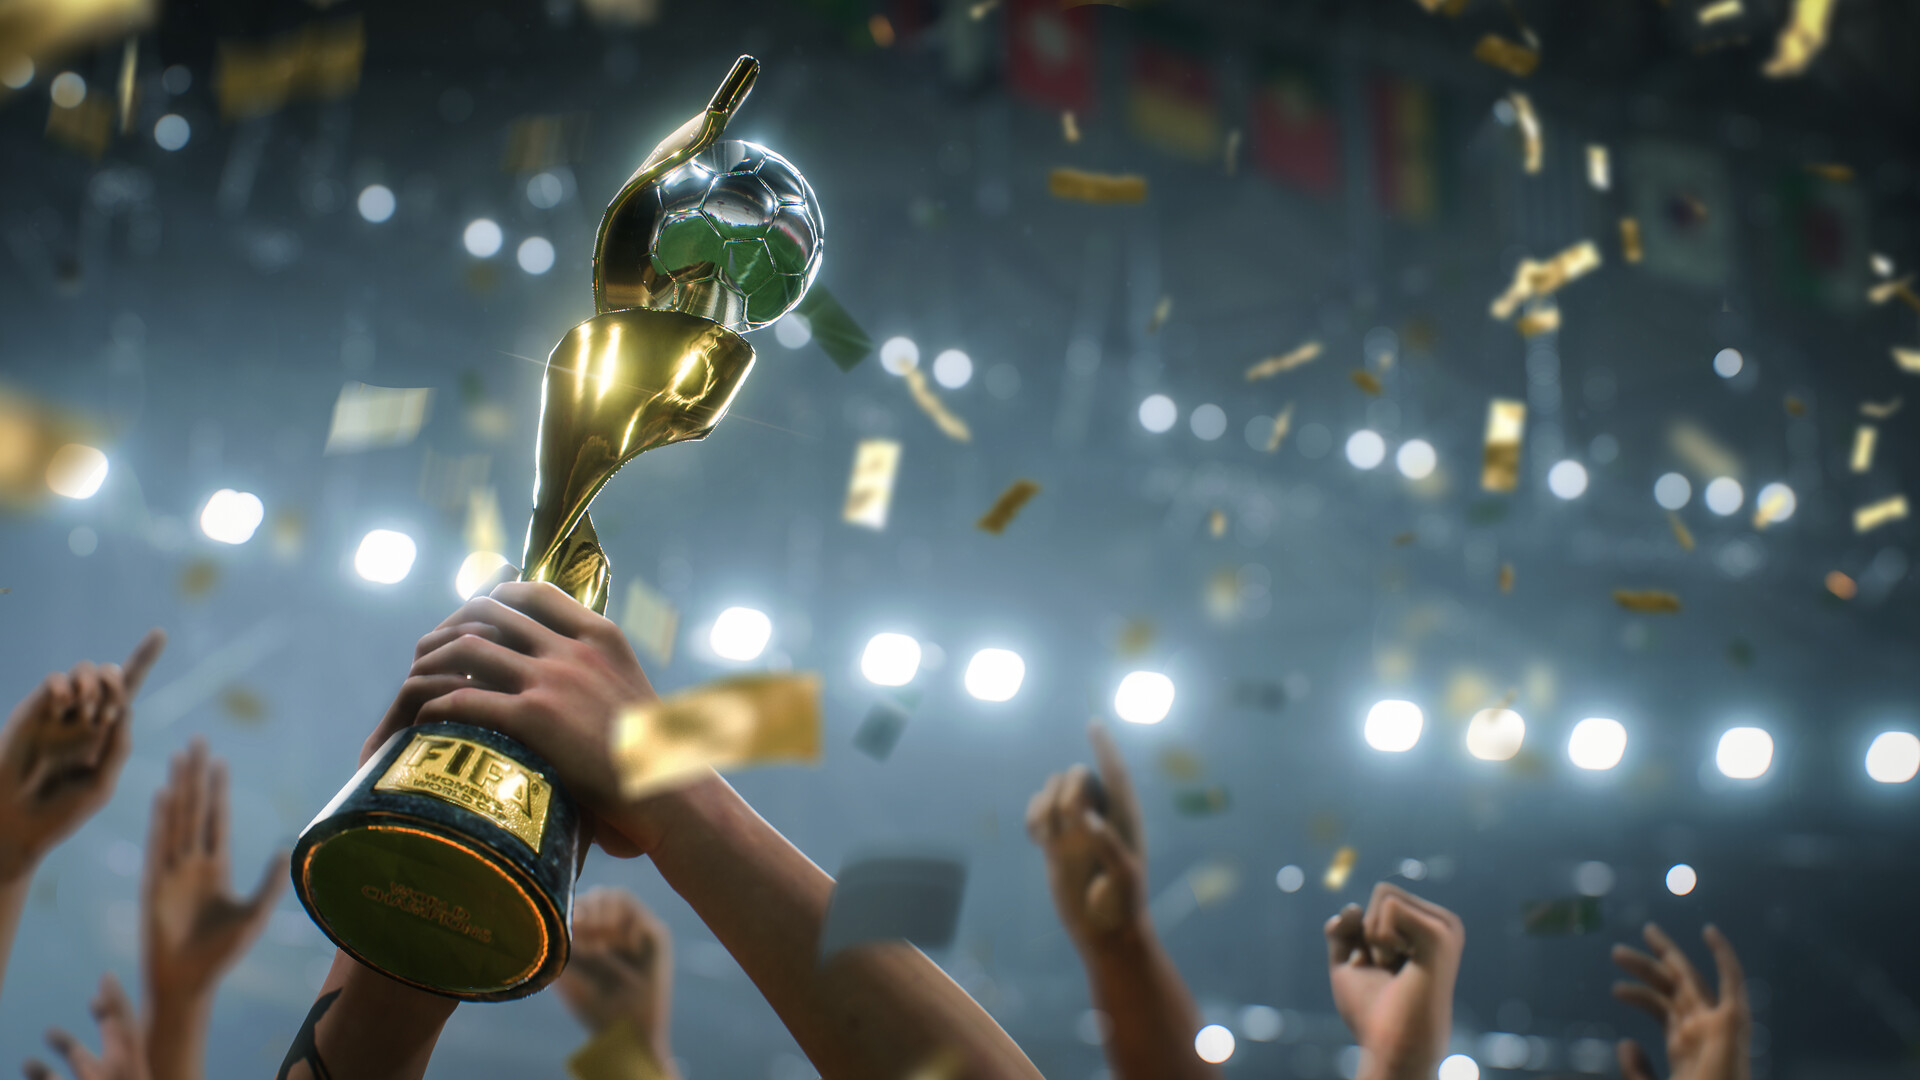 CHARTS: Price cut sees FIFA 23 shoot up Steam charts